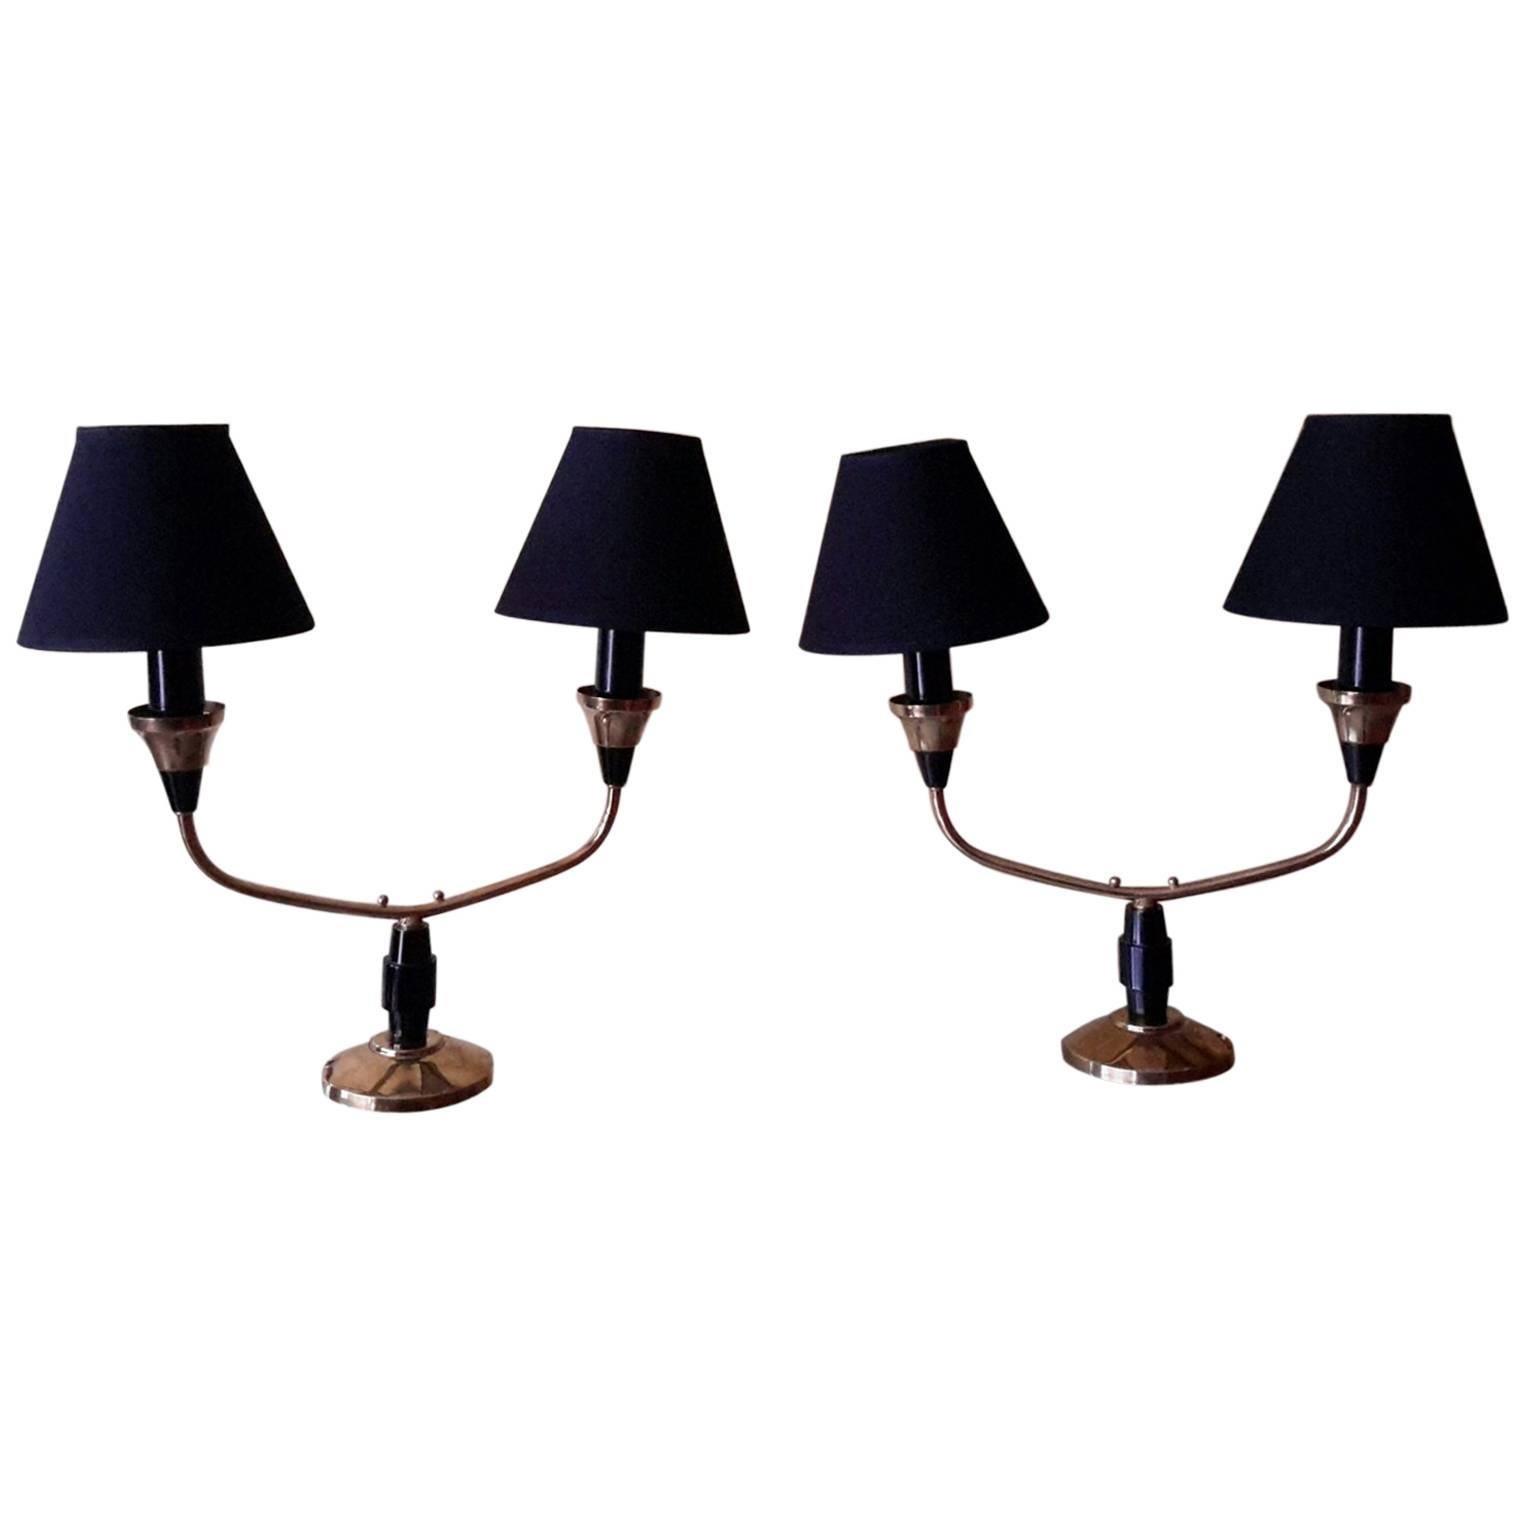 Mid-Century Modern Pair of Brass Table Lamps, France, 1950